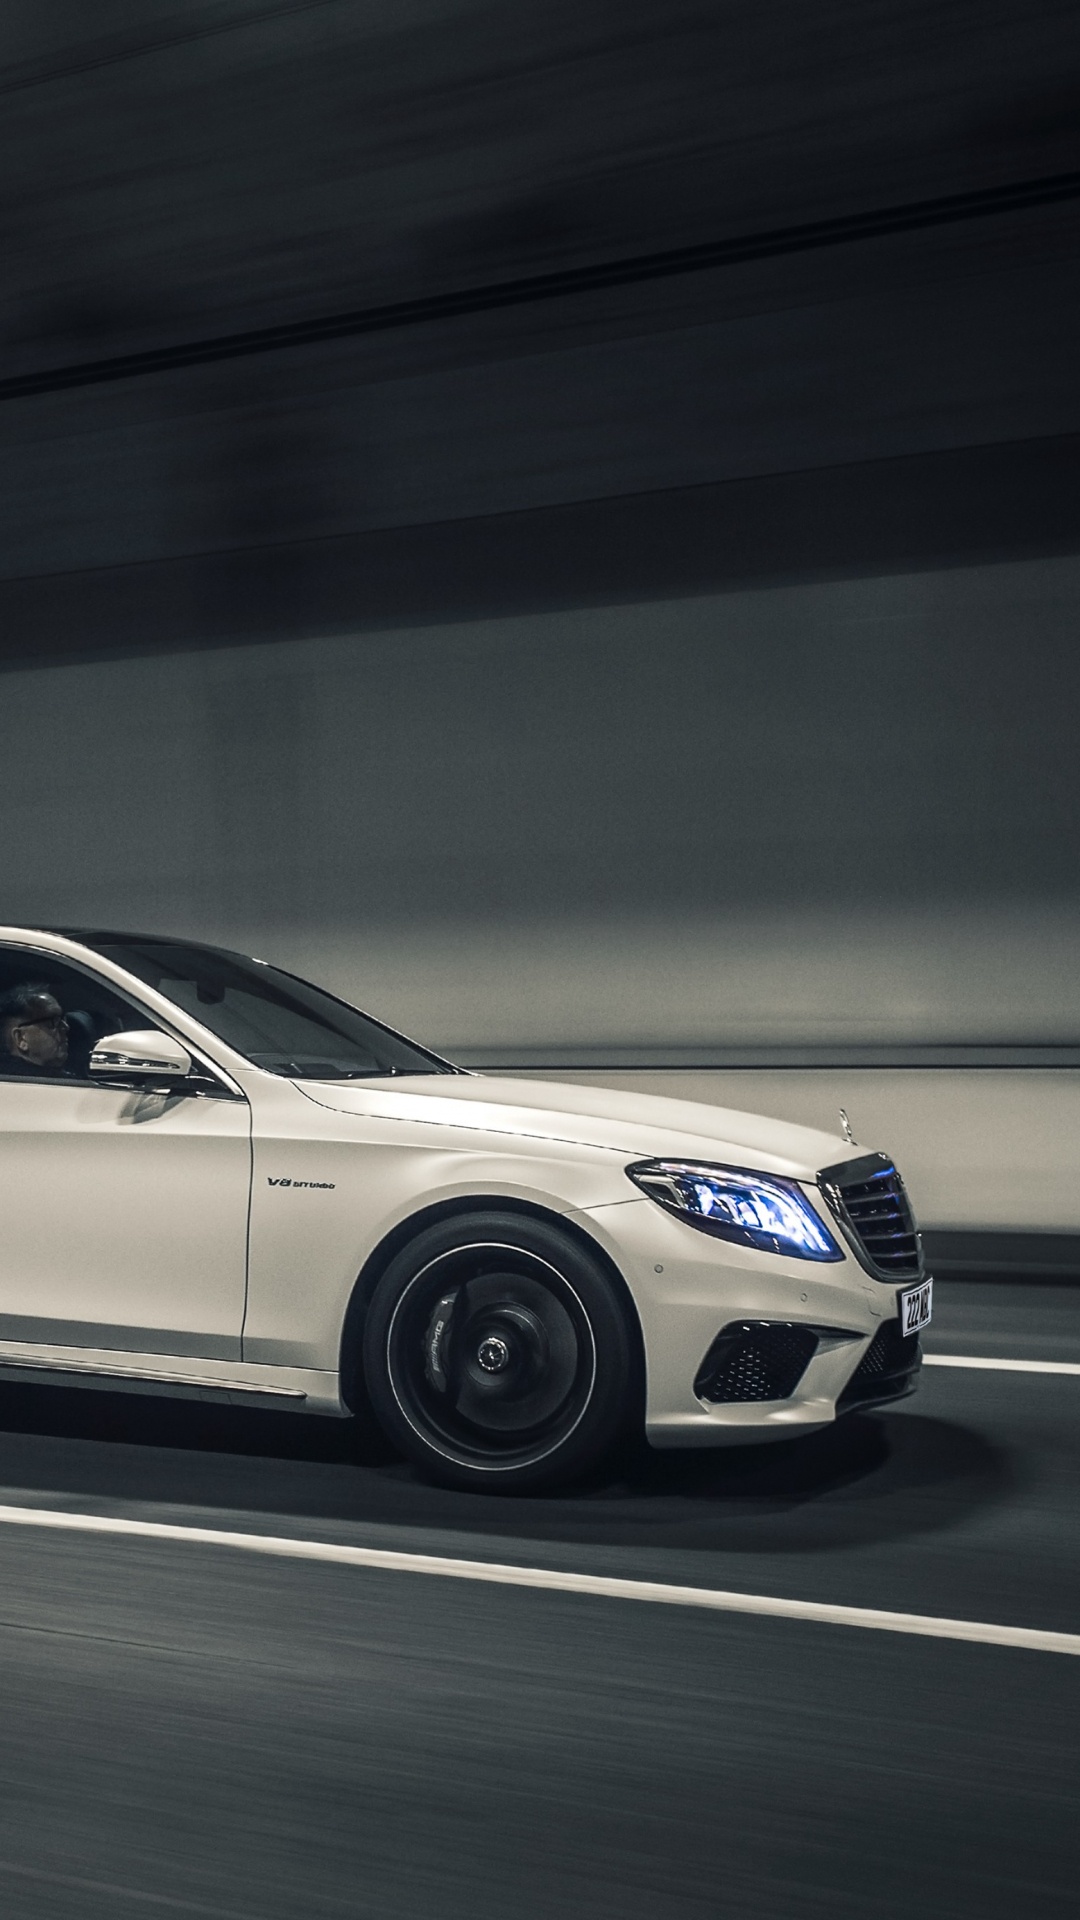 White Mercedes Benz Coupe on Road. Wallpaper in 1080x1920 Resolution